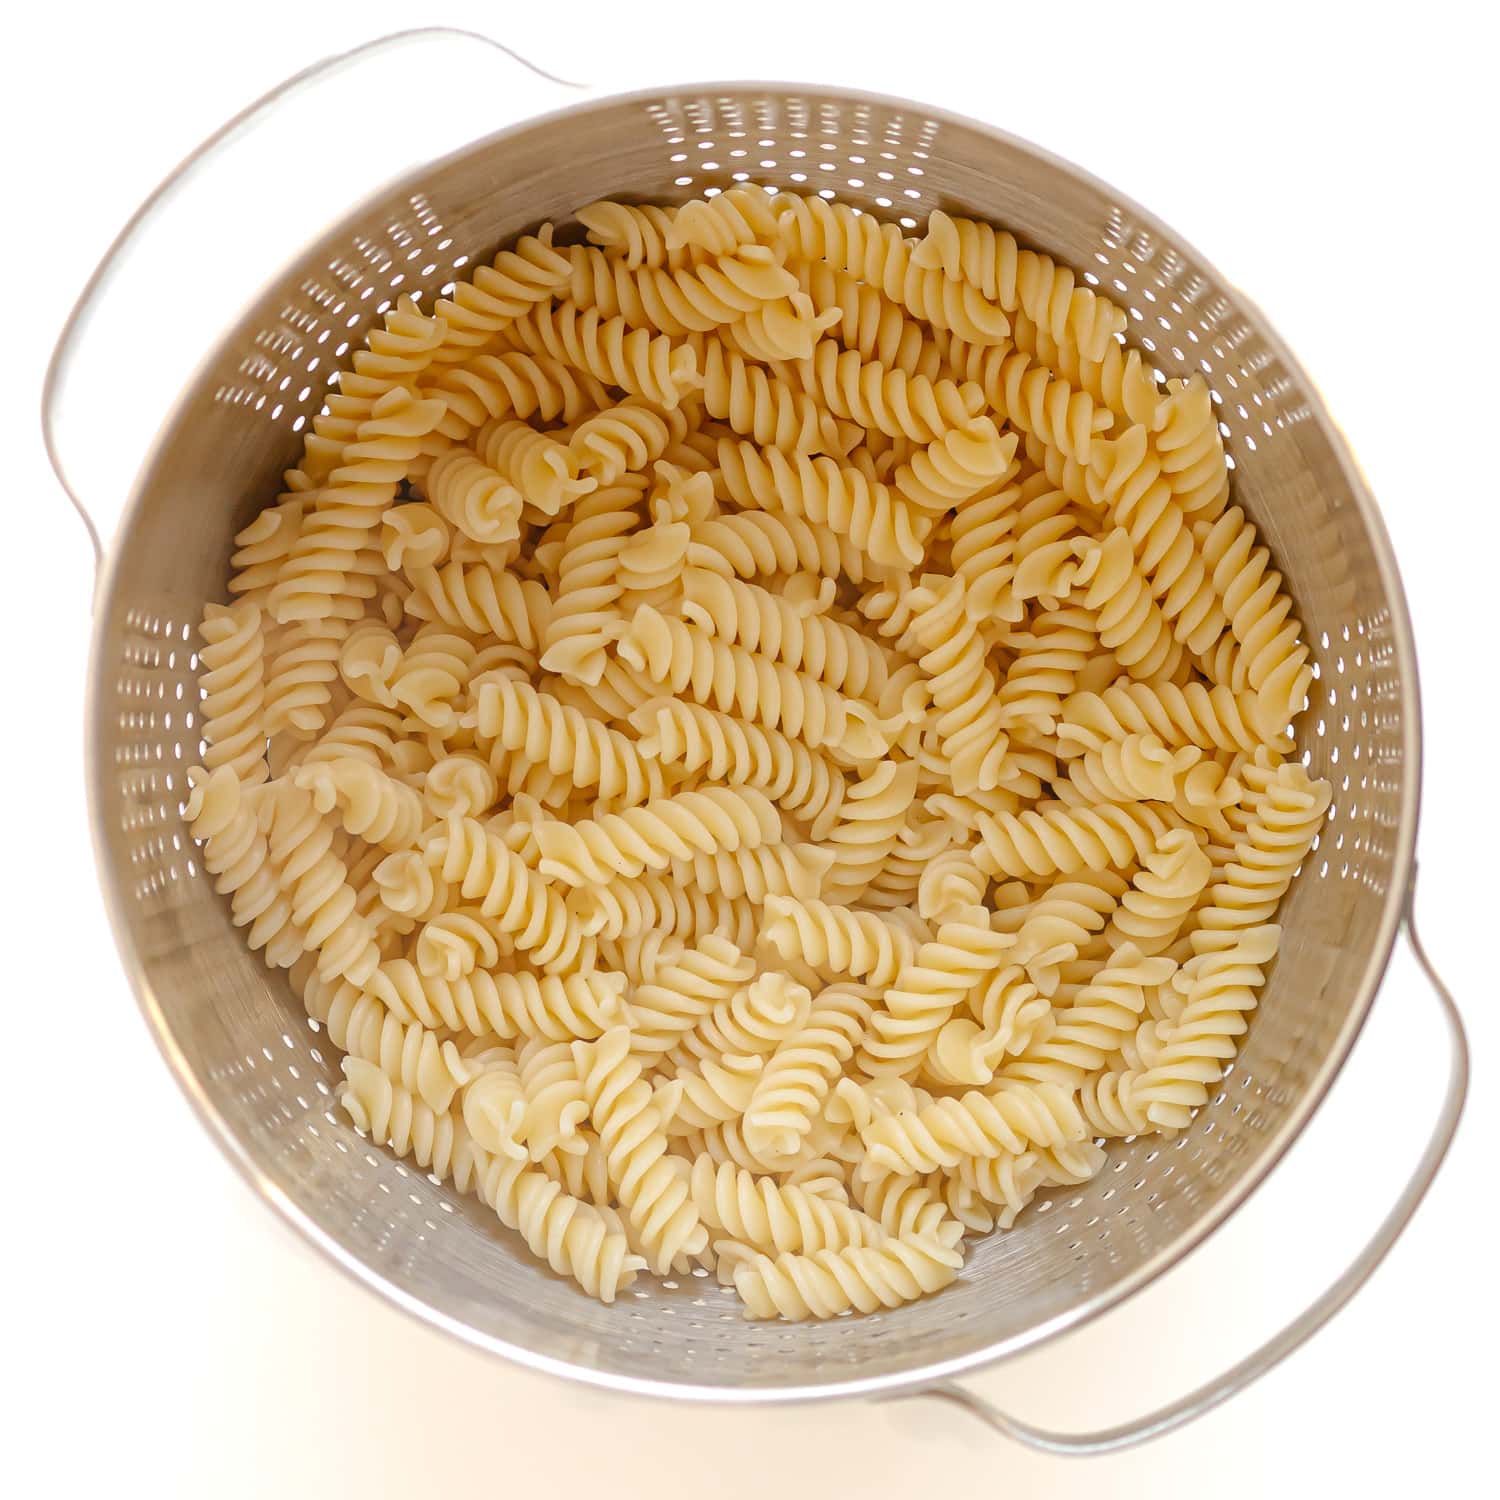 Cooked fusilli pasta in a stainless steel strainer.